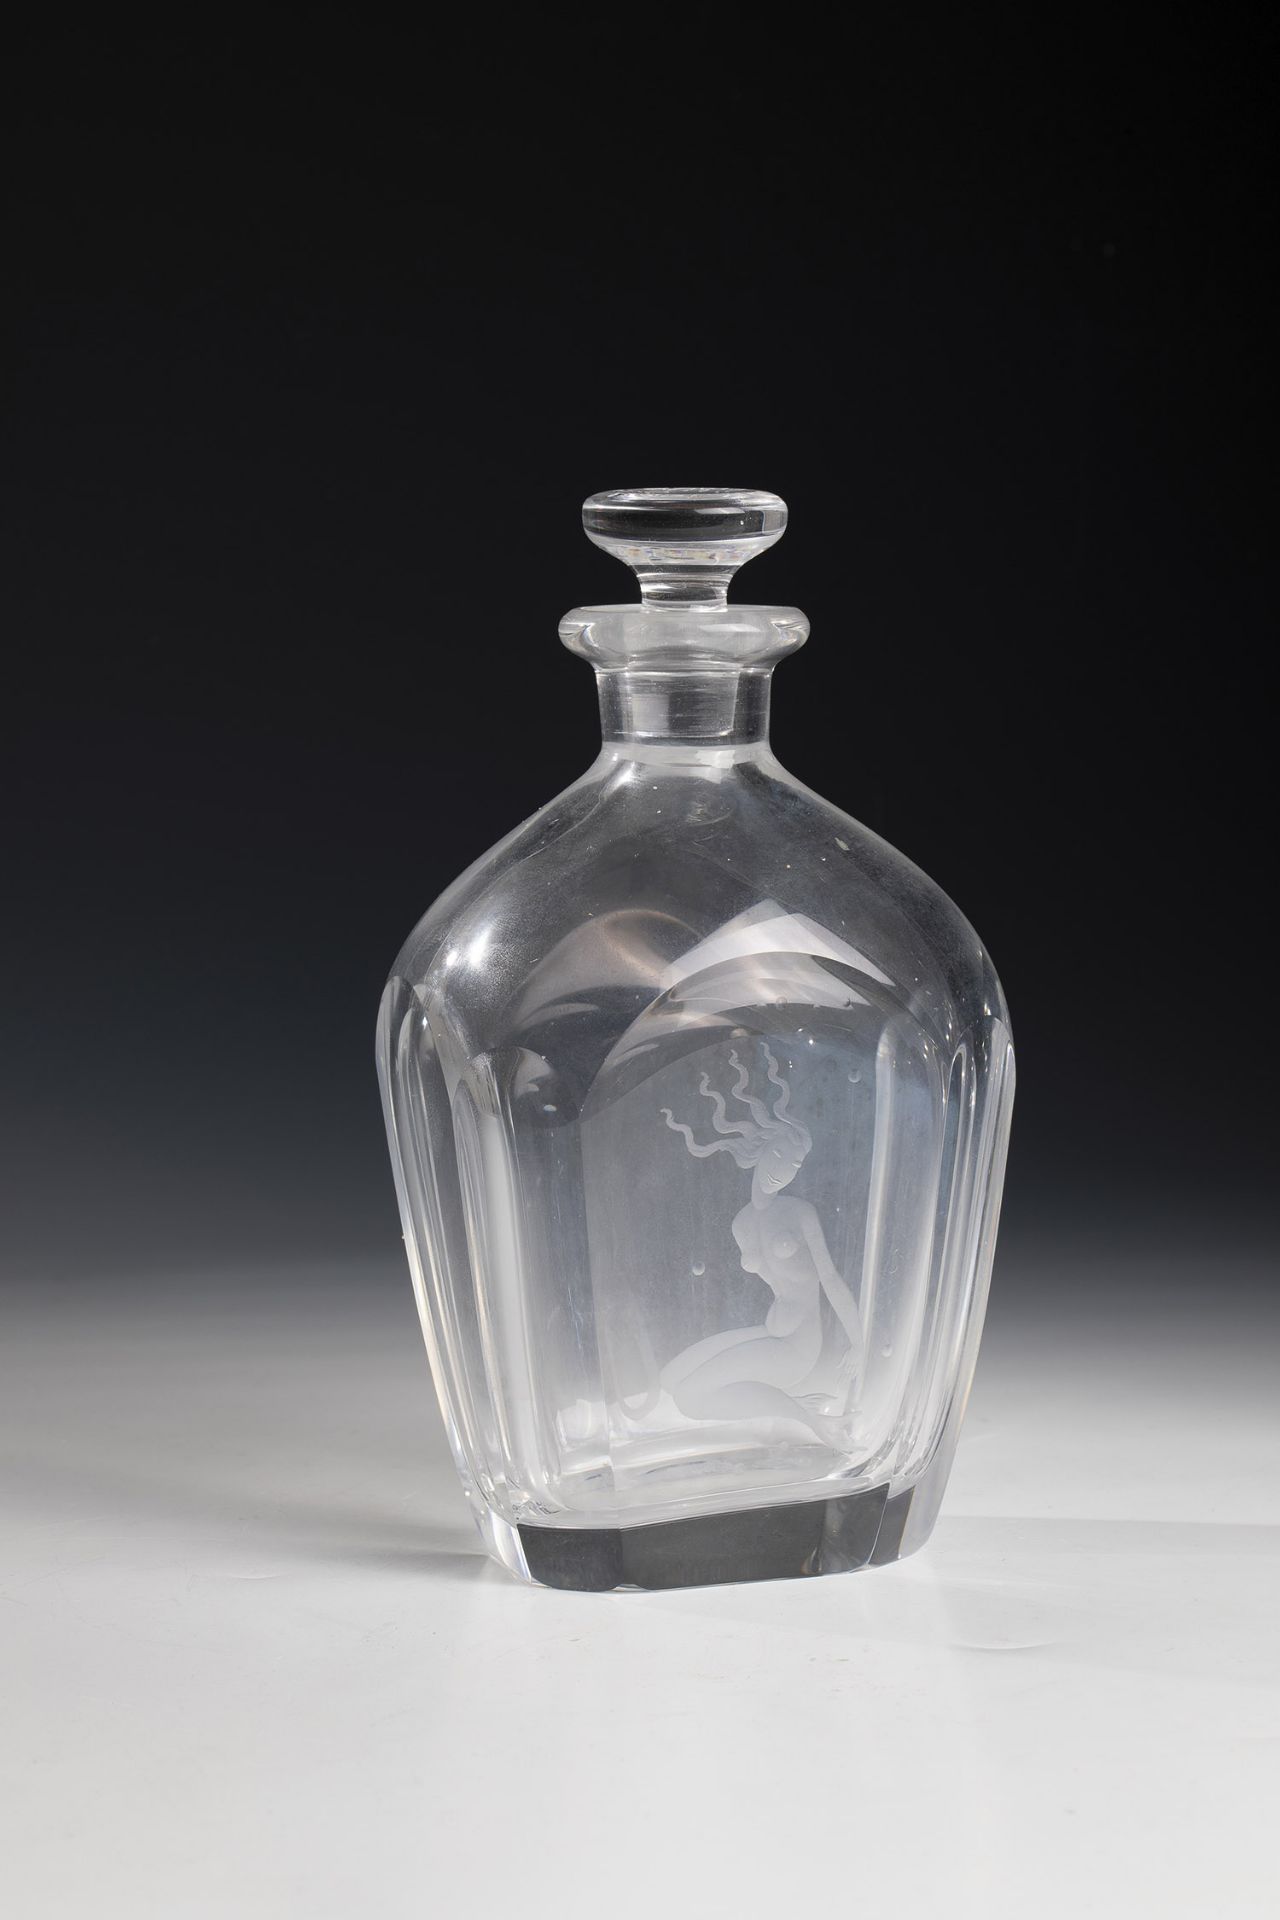 Carafe Orrefors, Sweden, 1950s Colorless Glass. On the faÃ§ade front view, a mermaid engraved in a